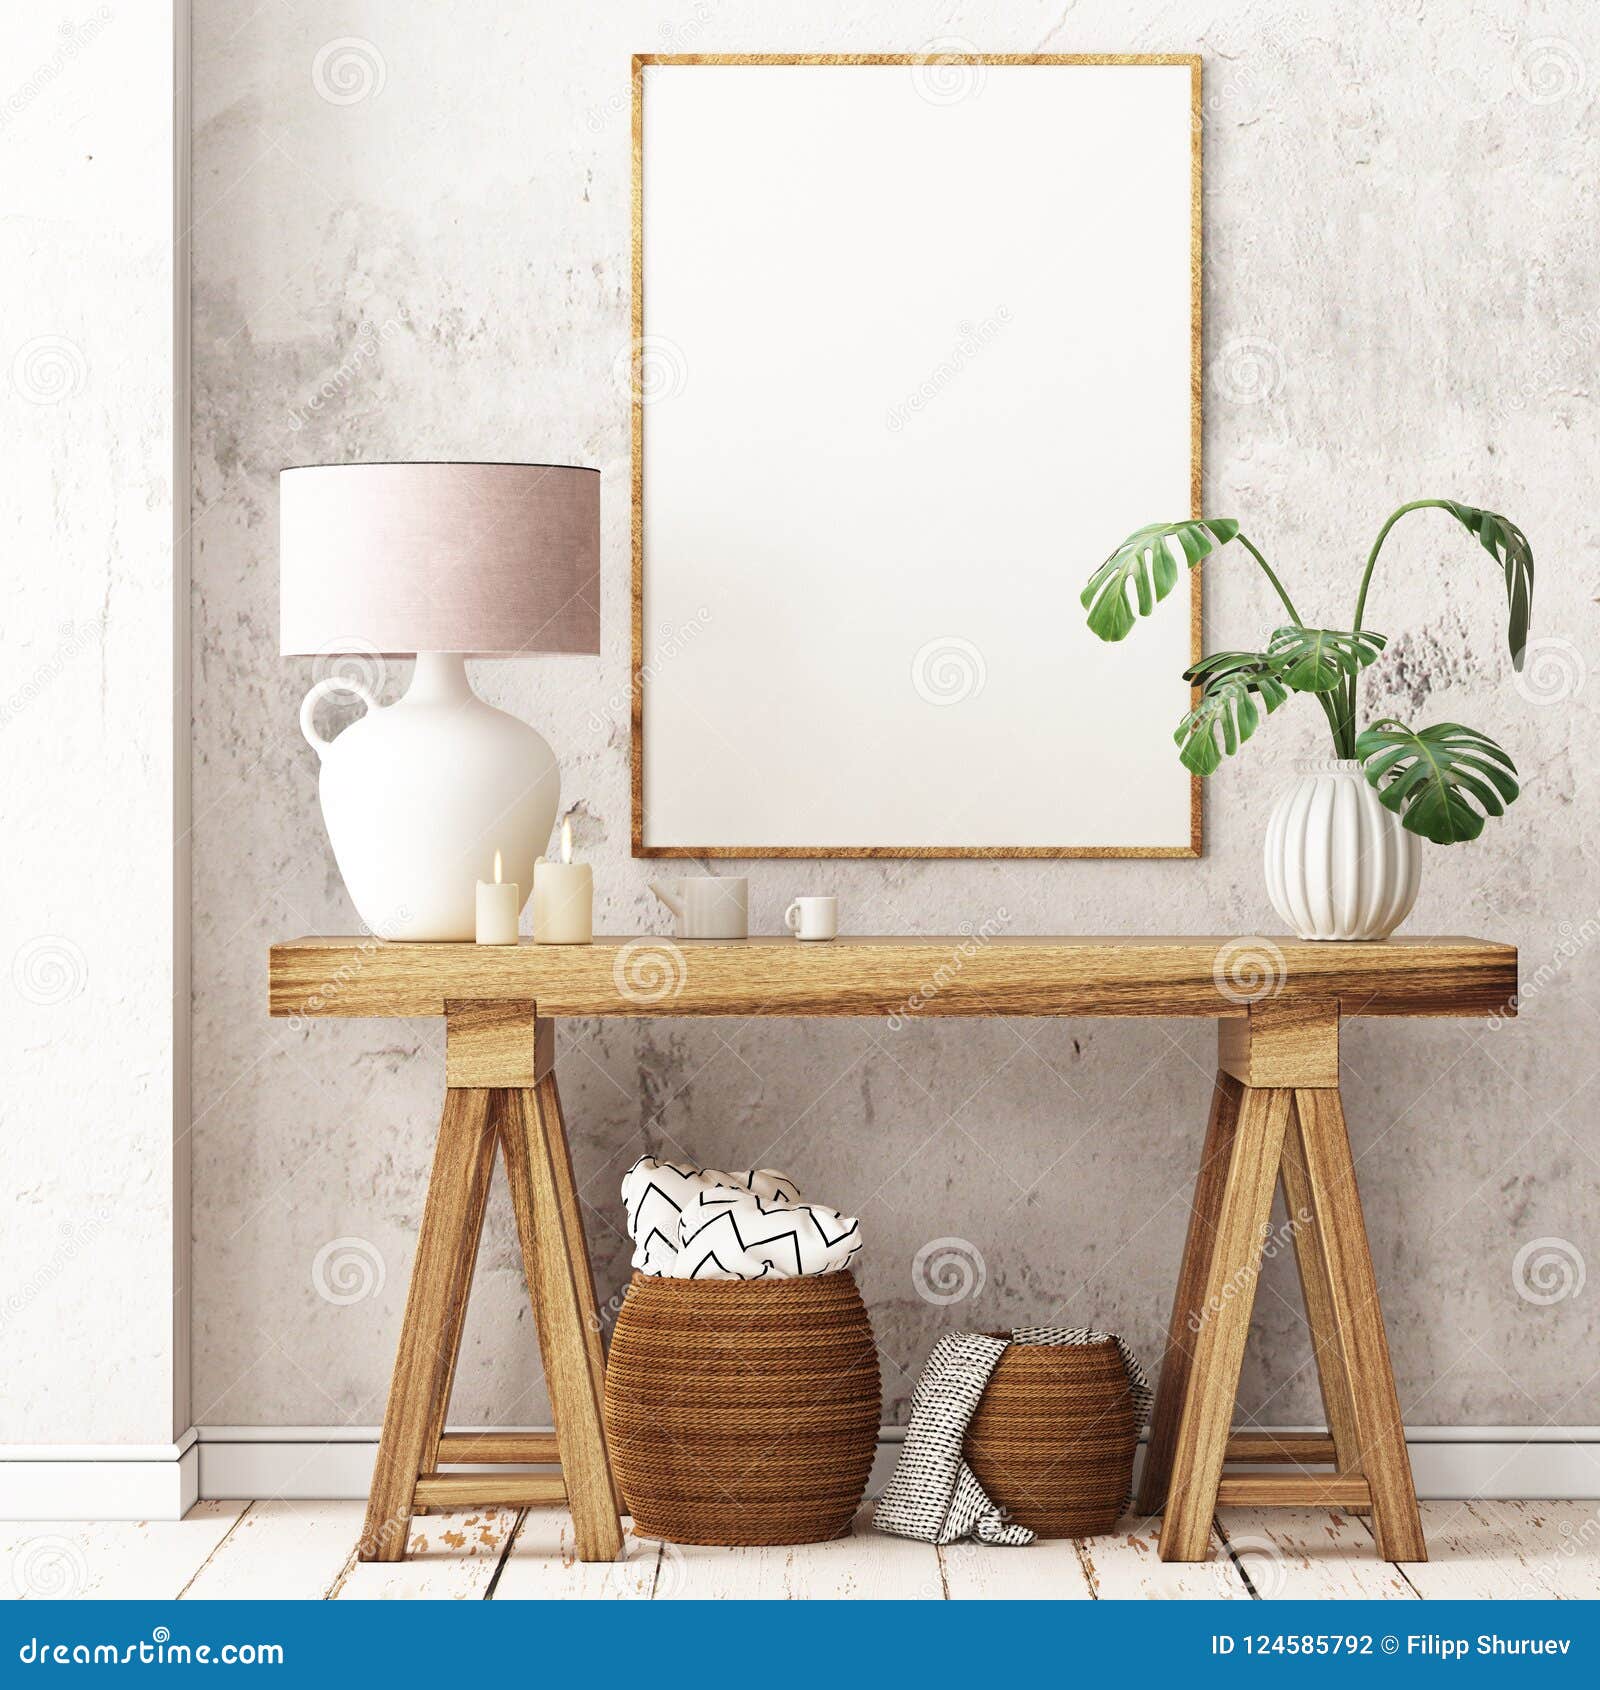 mockup poster in the scandinavian interior with a console table in lagom style.